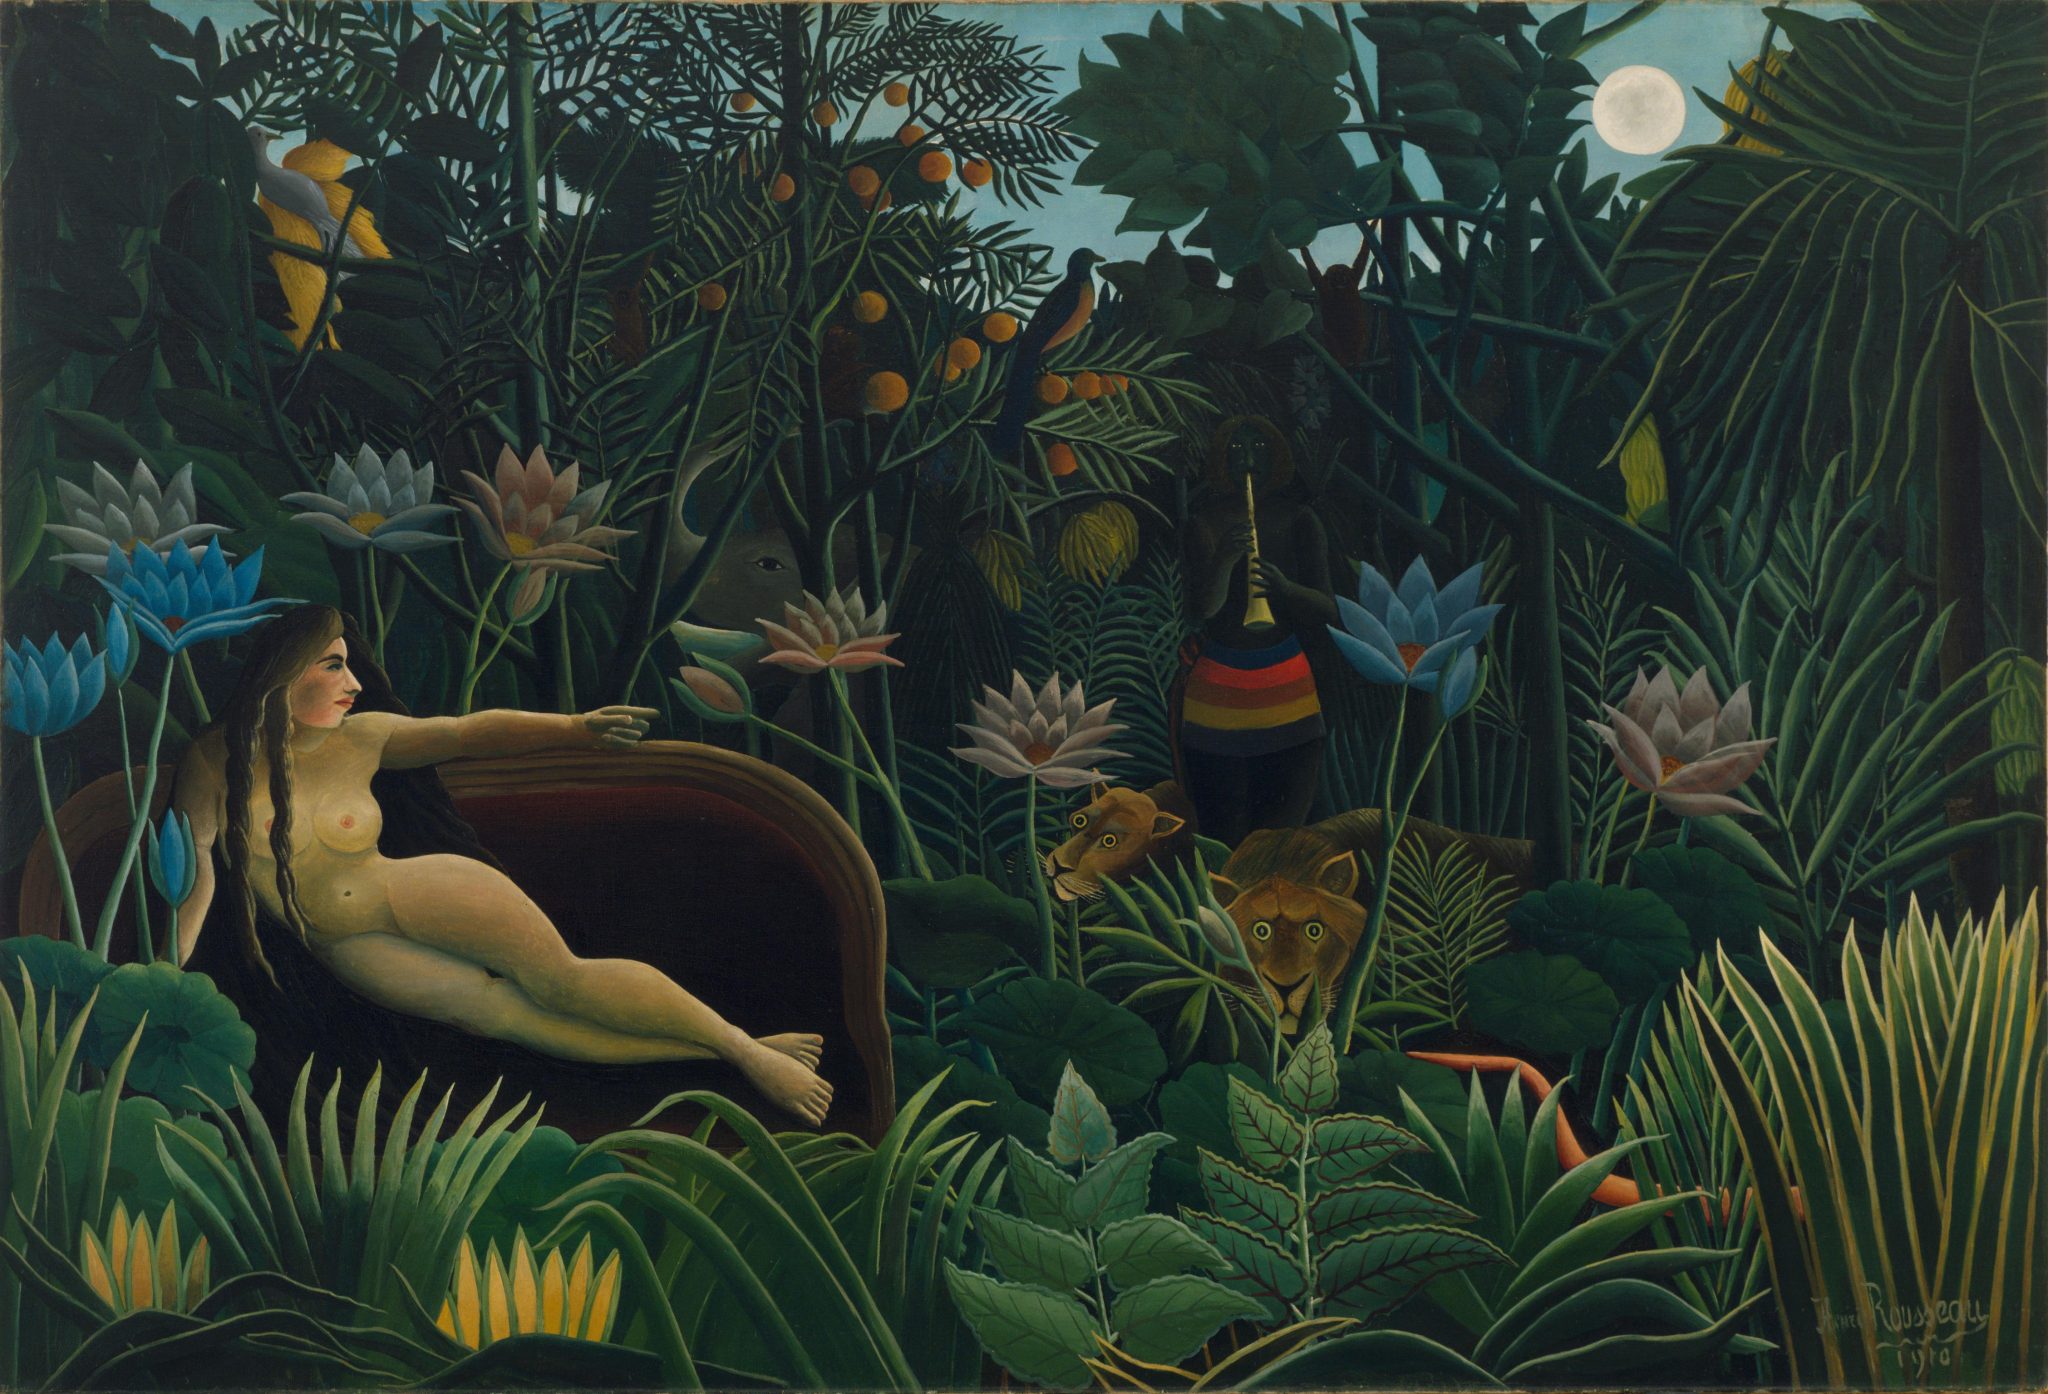 Painting by Henri Rousseau, The Dream (1910)